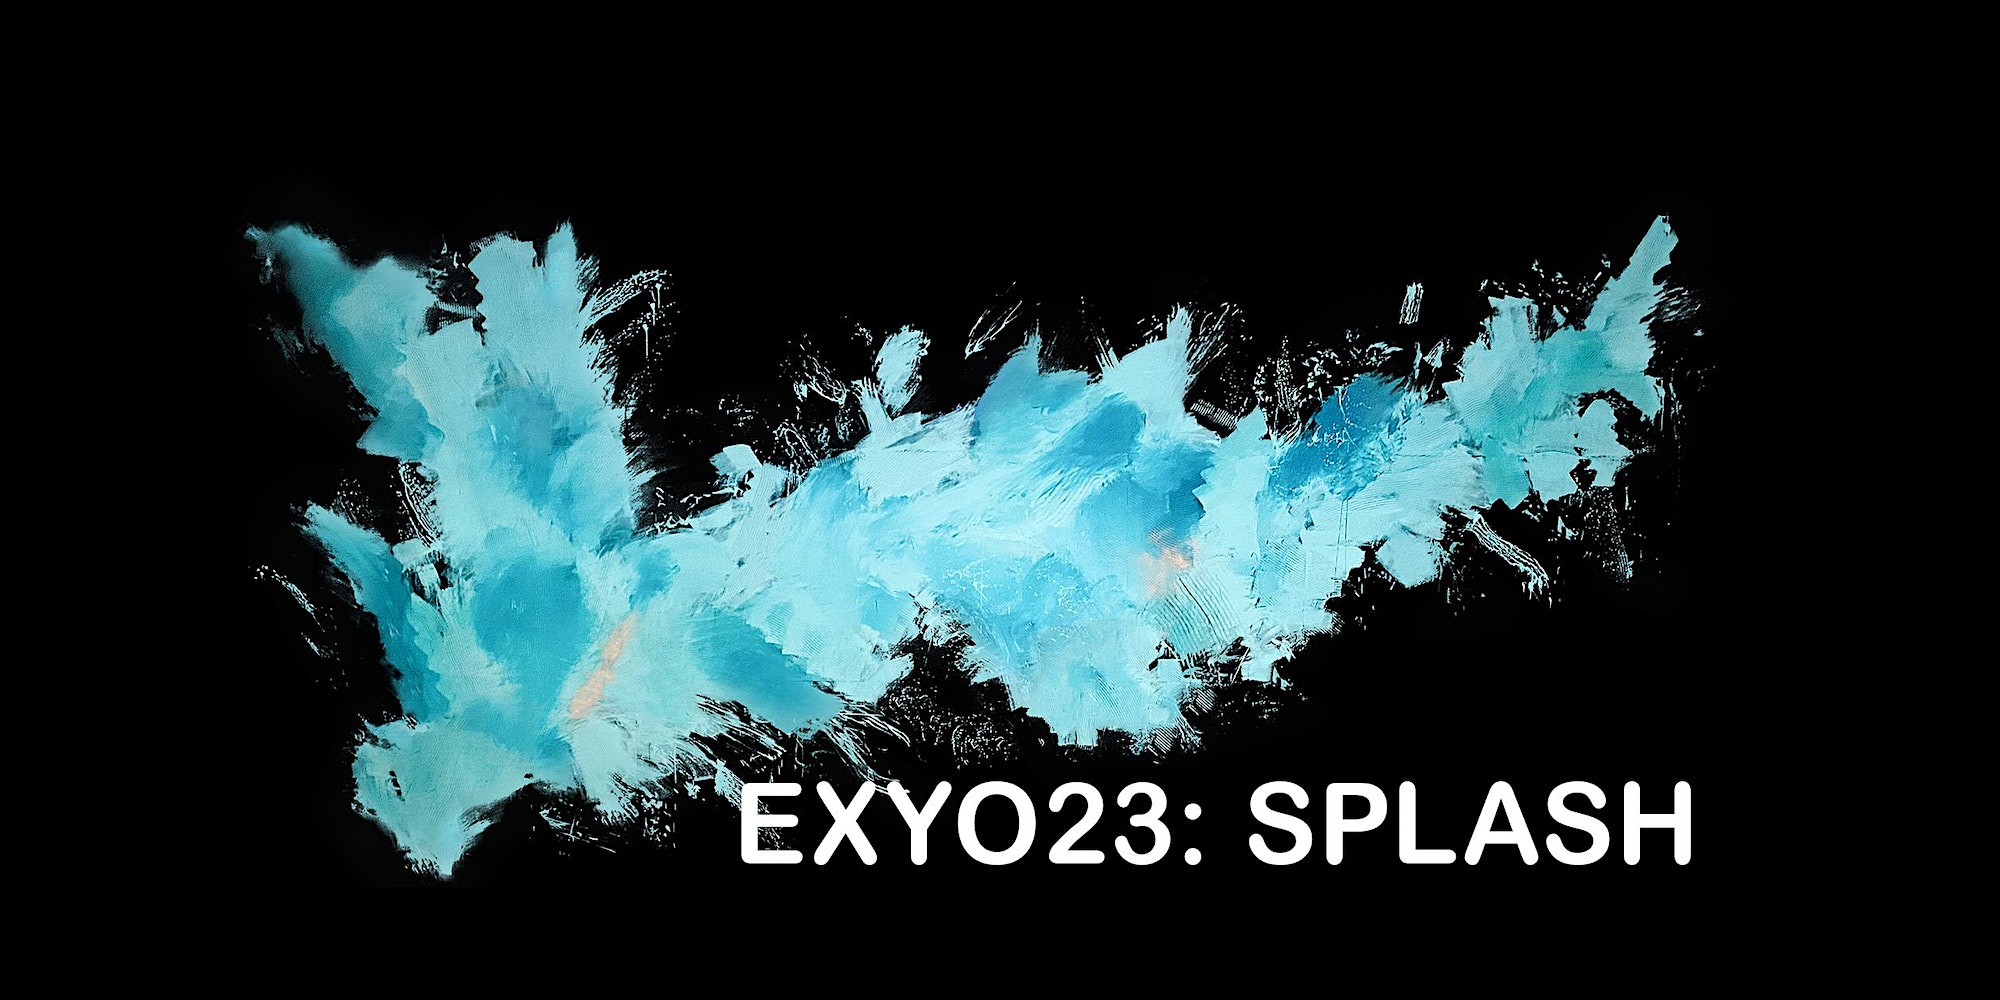 Exo2 splash - a black background with blue paint on it.